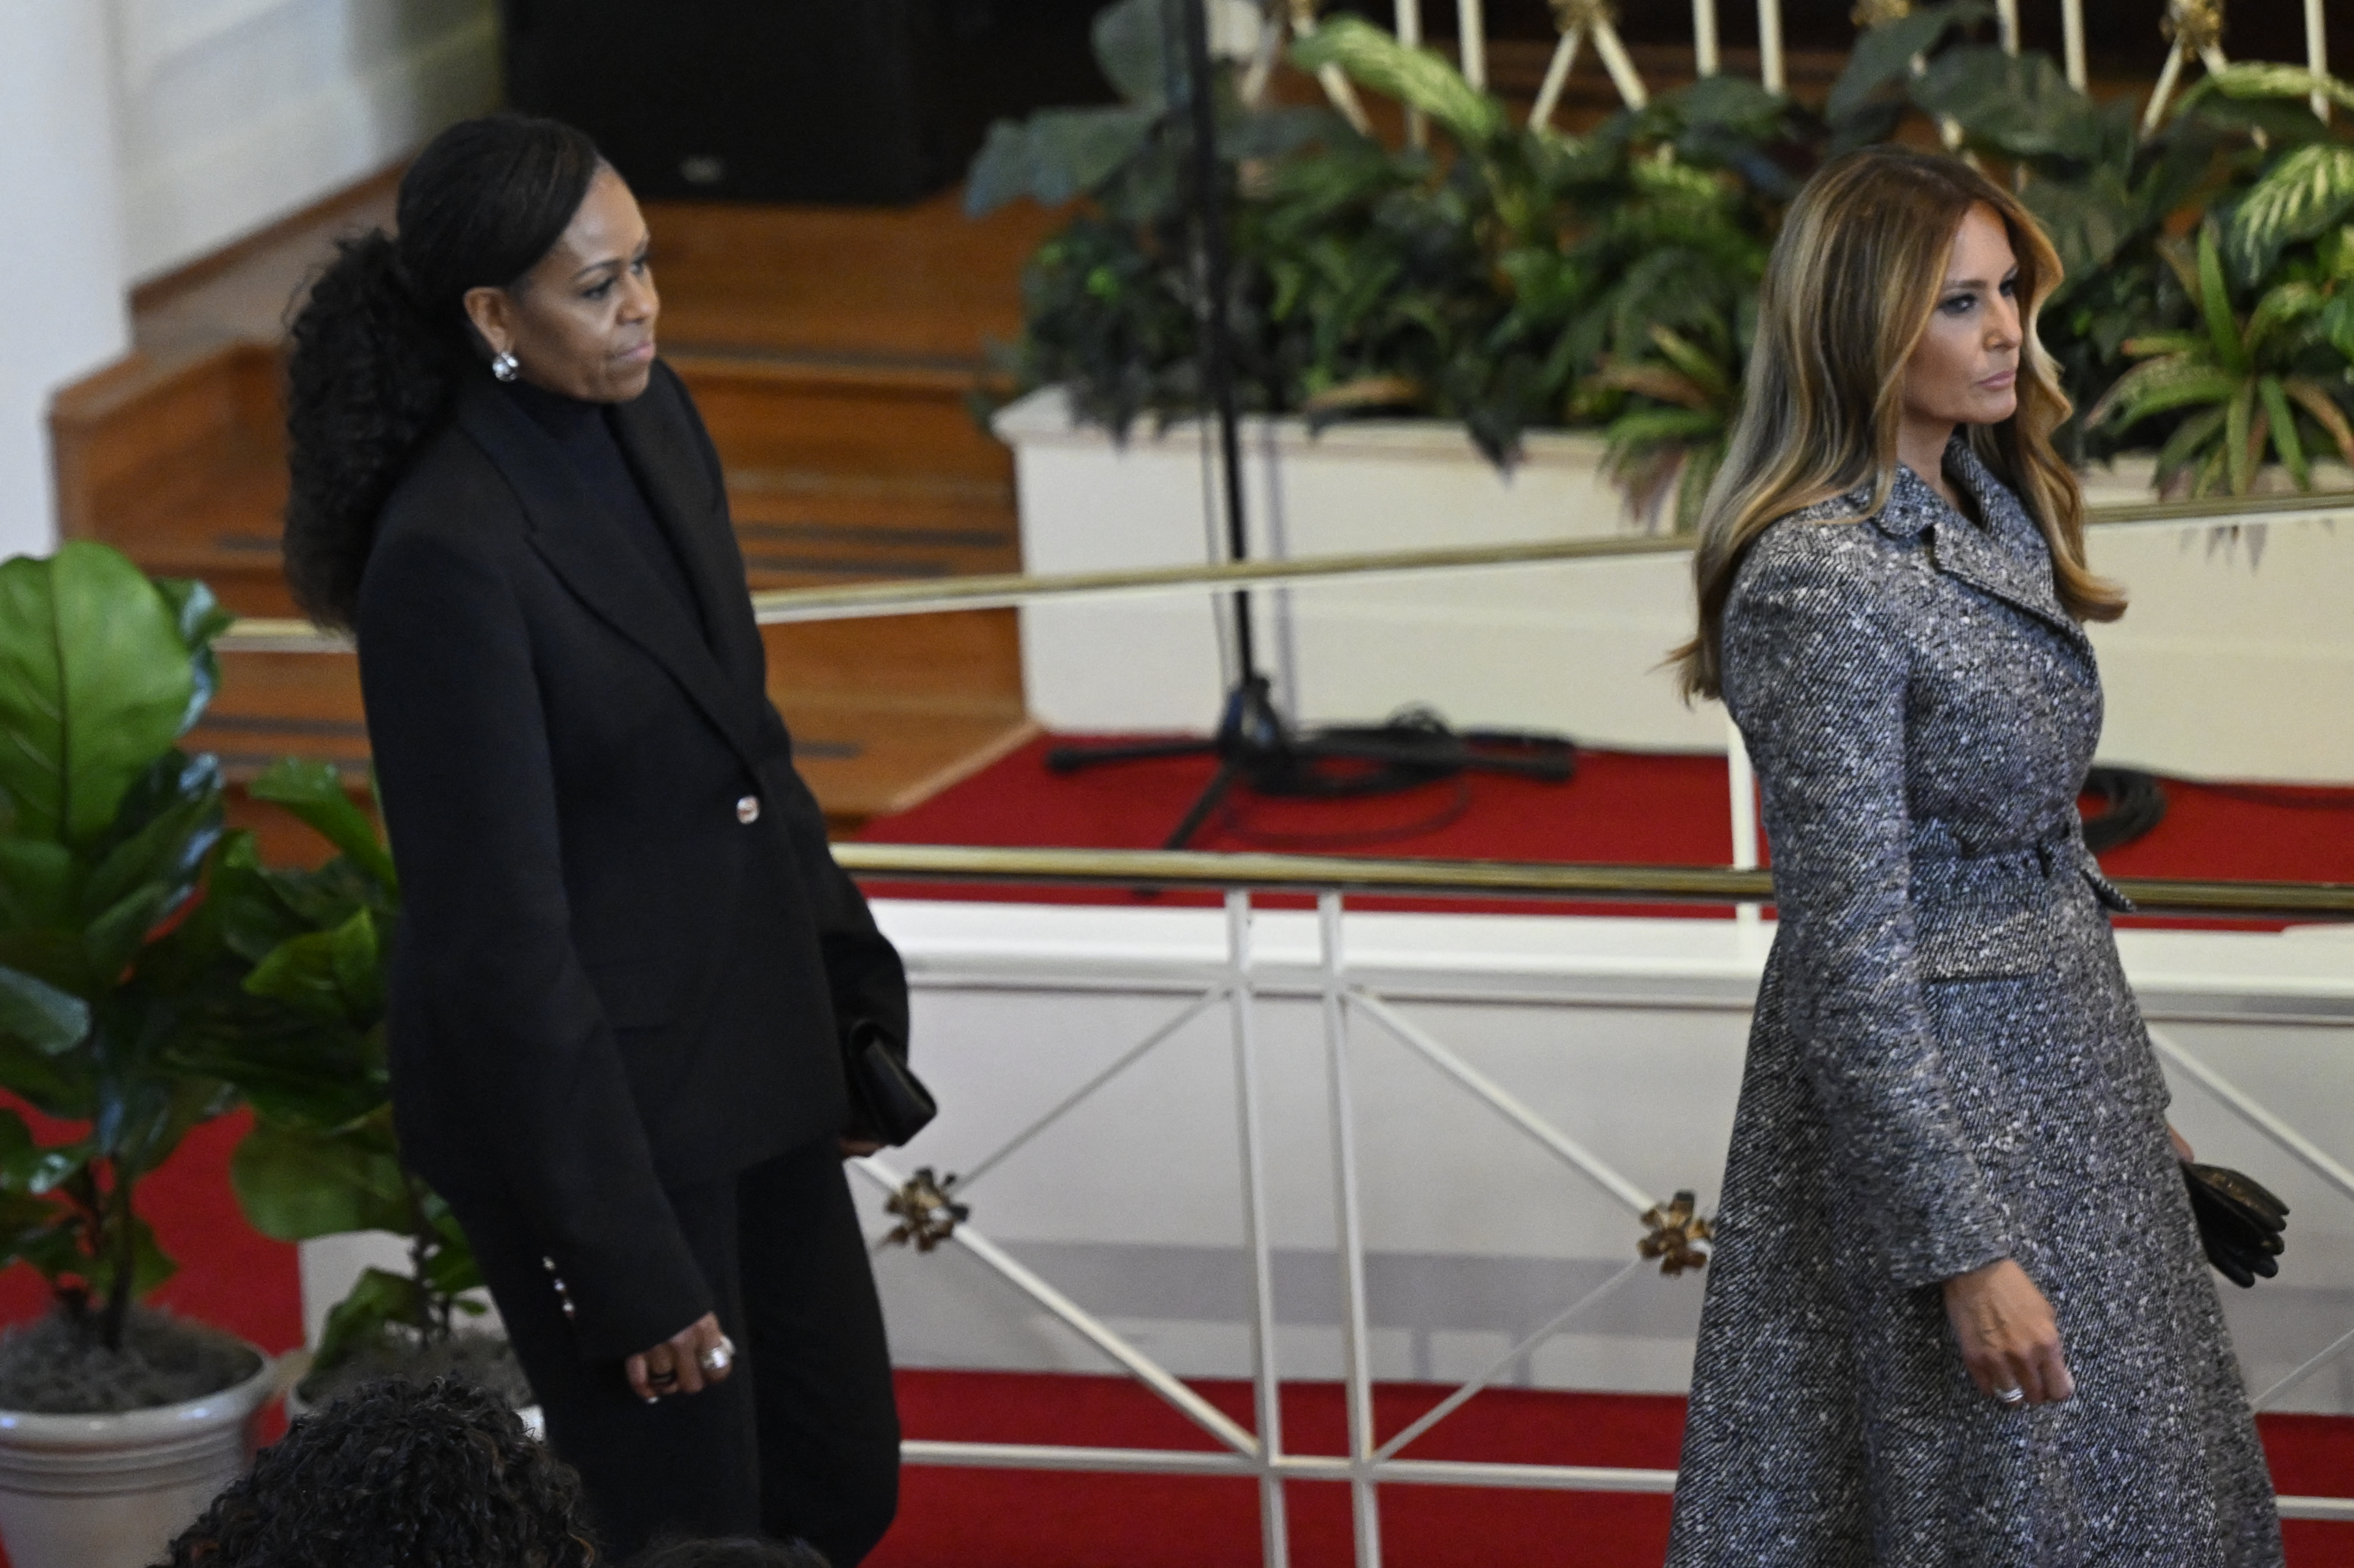 Former U.S. First Ladies Michelle Obama and Melania Trump at former U.S First Lady Rosalynn Carter's tribute service in Atlanta, Georgia on November 28, 2023 | Source: Getty Images